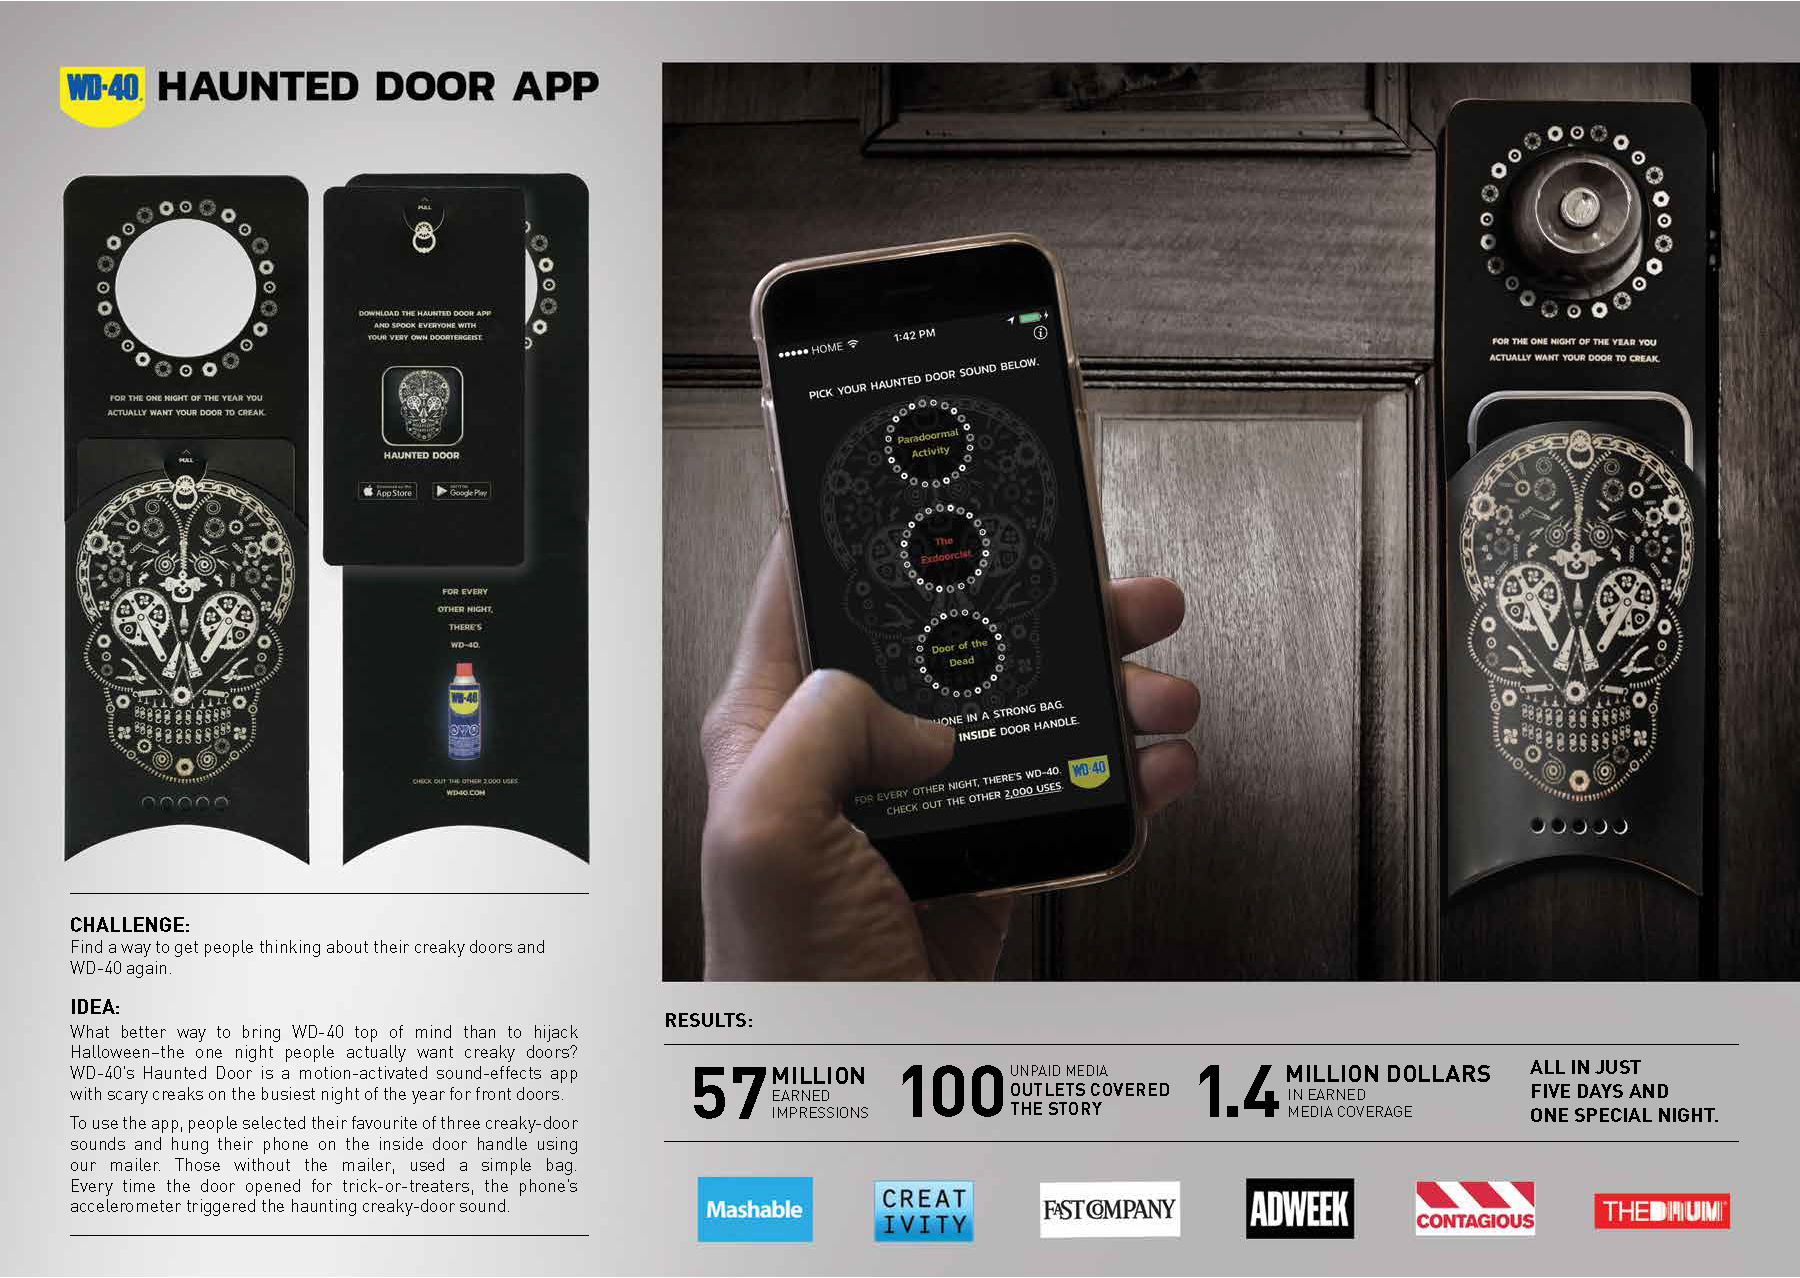 Poster explaining how BIMM came up with the Haunted Door app idea for WD-40, how the app works, and its success.